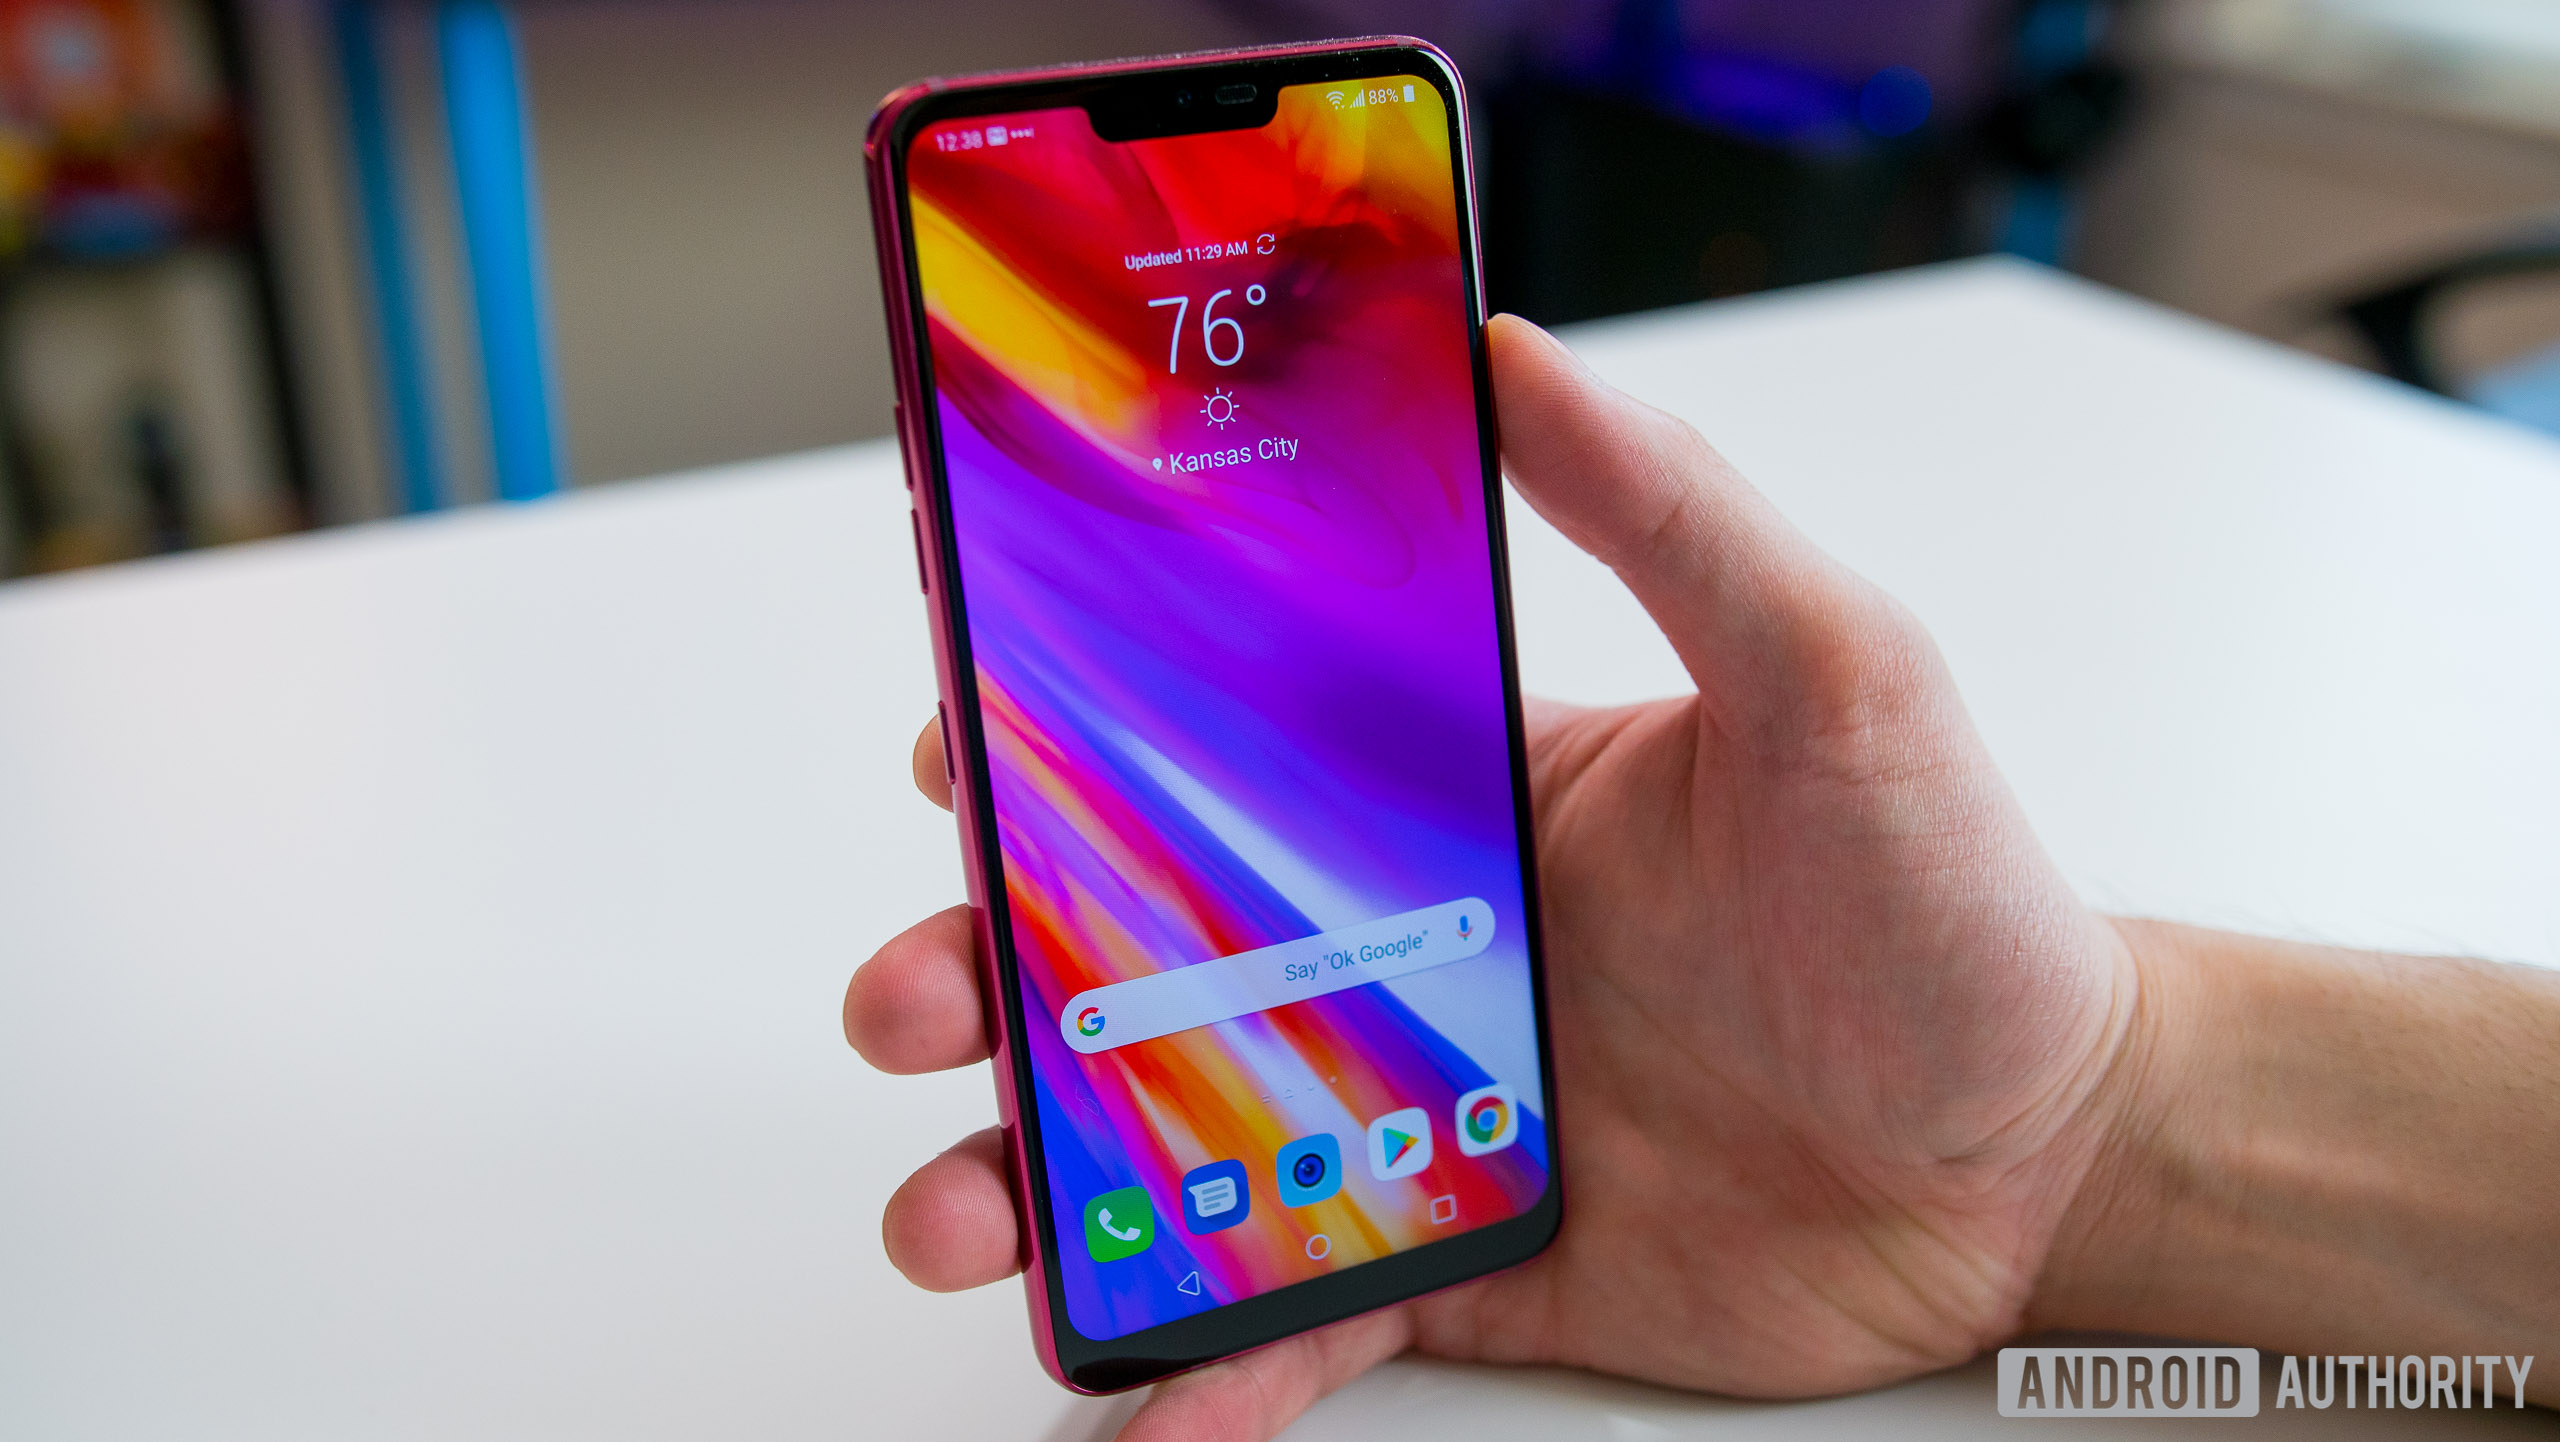 The front of the LG G7 ThinQ.